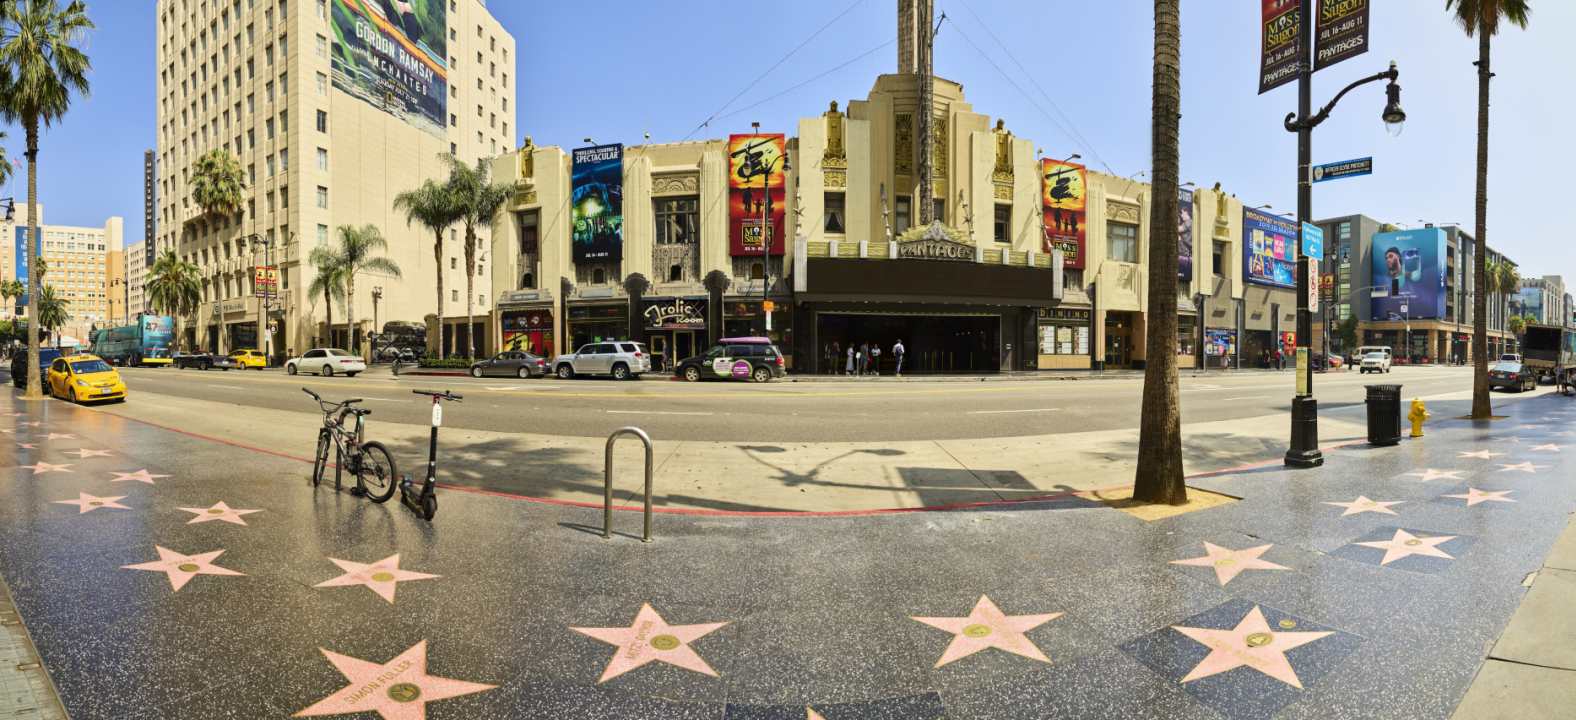 Los Angeles Hollywood Walk of Fame